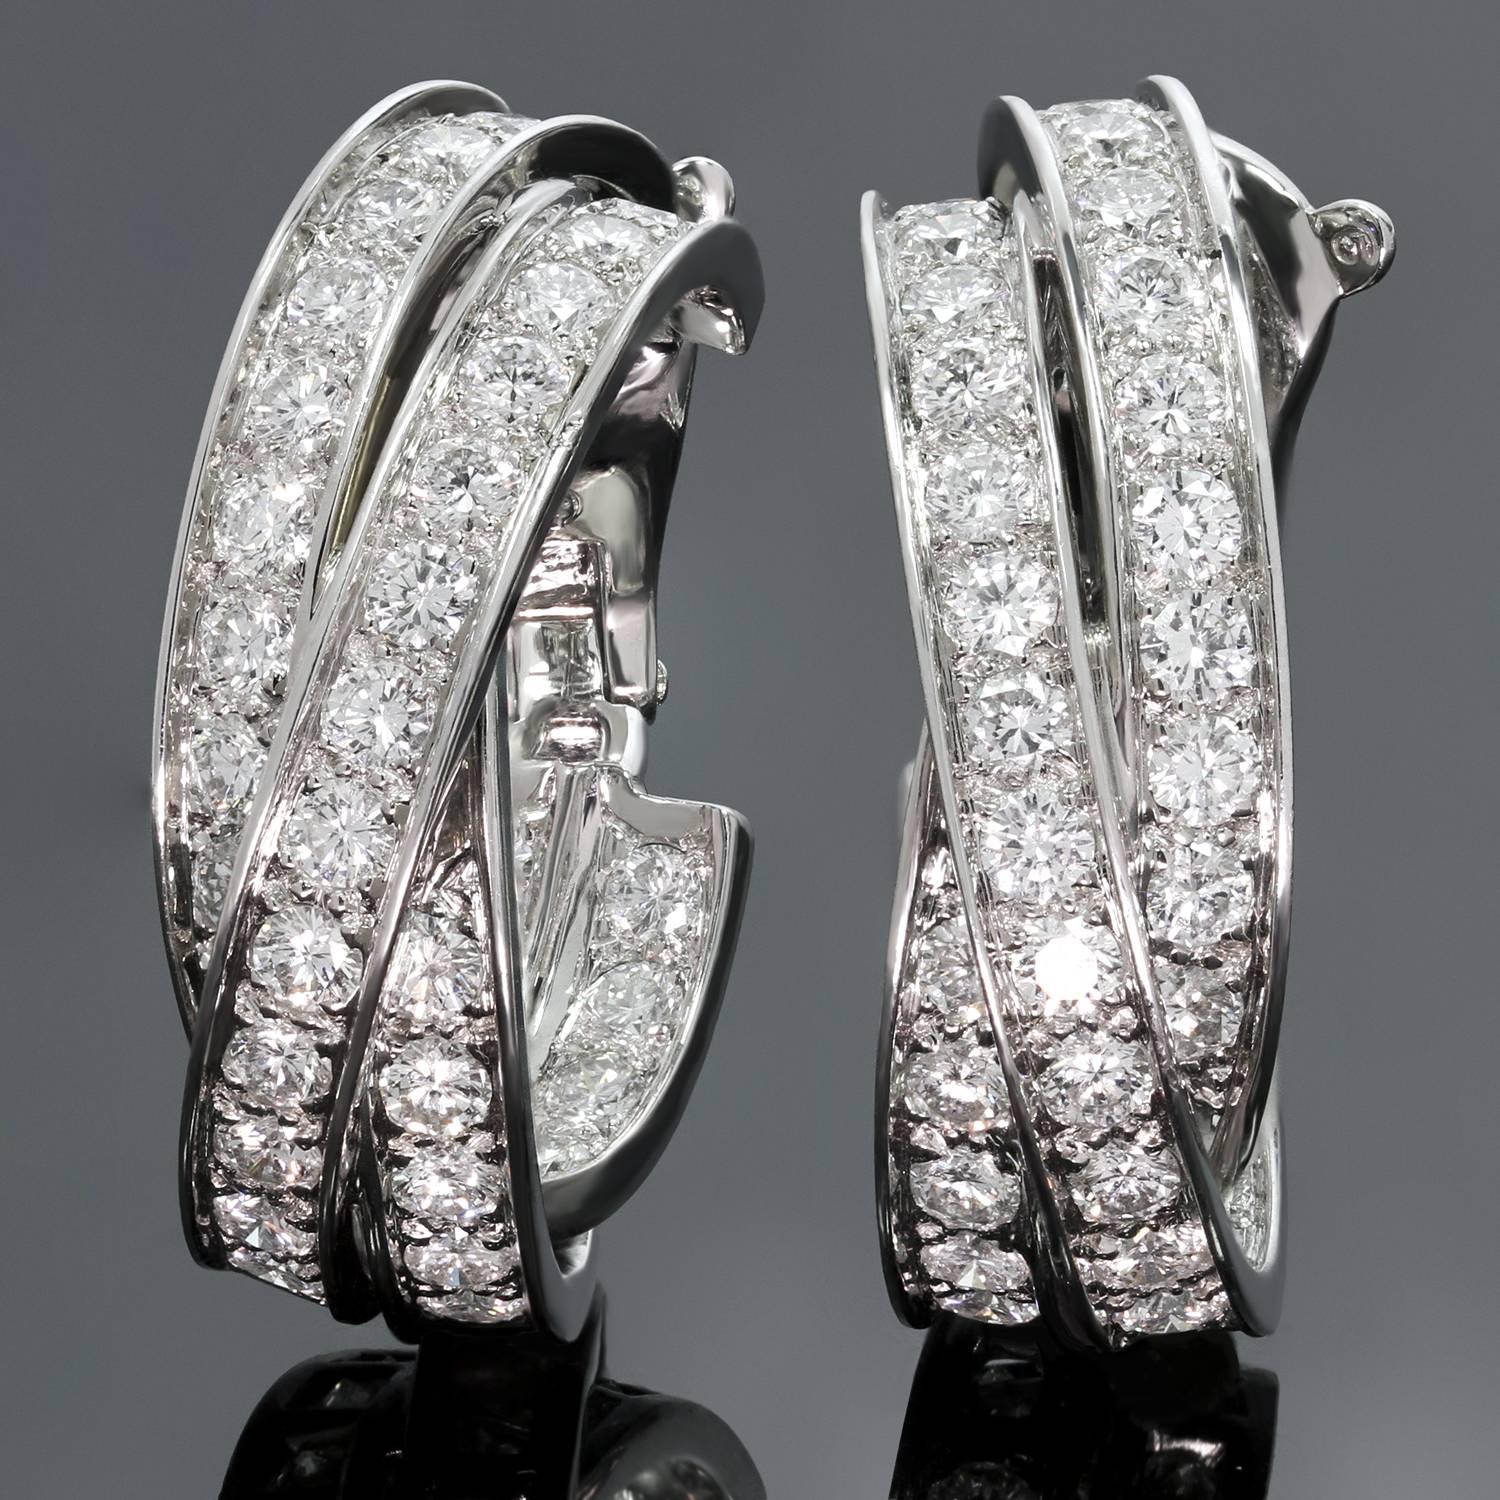 These fabulous in inside-out oval wrap earrings from Cartier's iconic Trinity collection are crafted 18k white gold and set with sparkling brilliant-cut diamonds of an estimated 5.50 carats. This is the large model of these flattering and rare